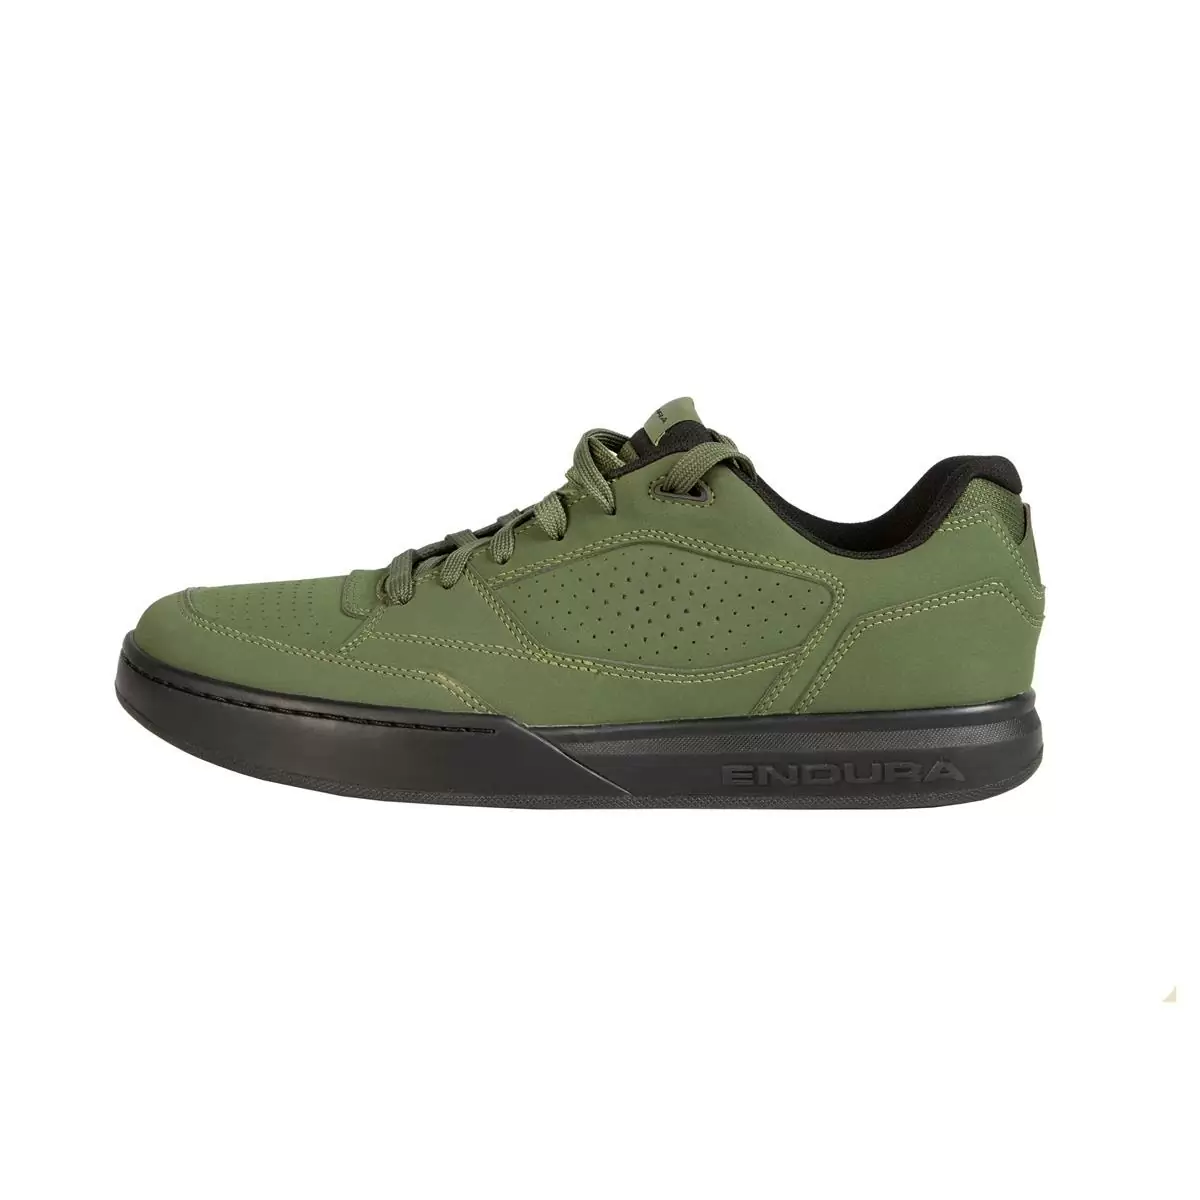 Hummvee Flat Pedal Shoes Green Size 41 #1